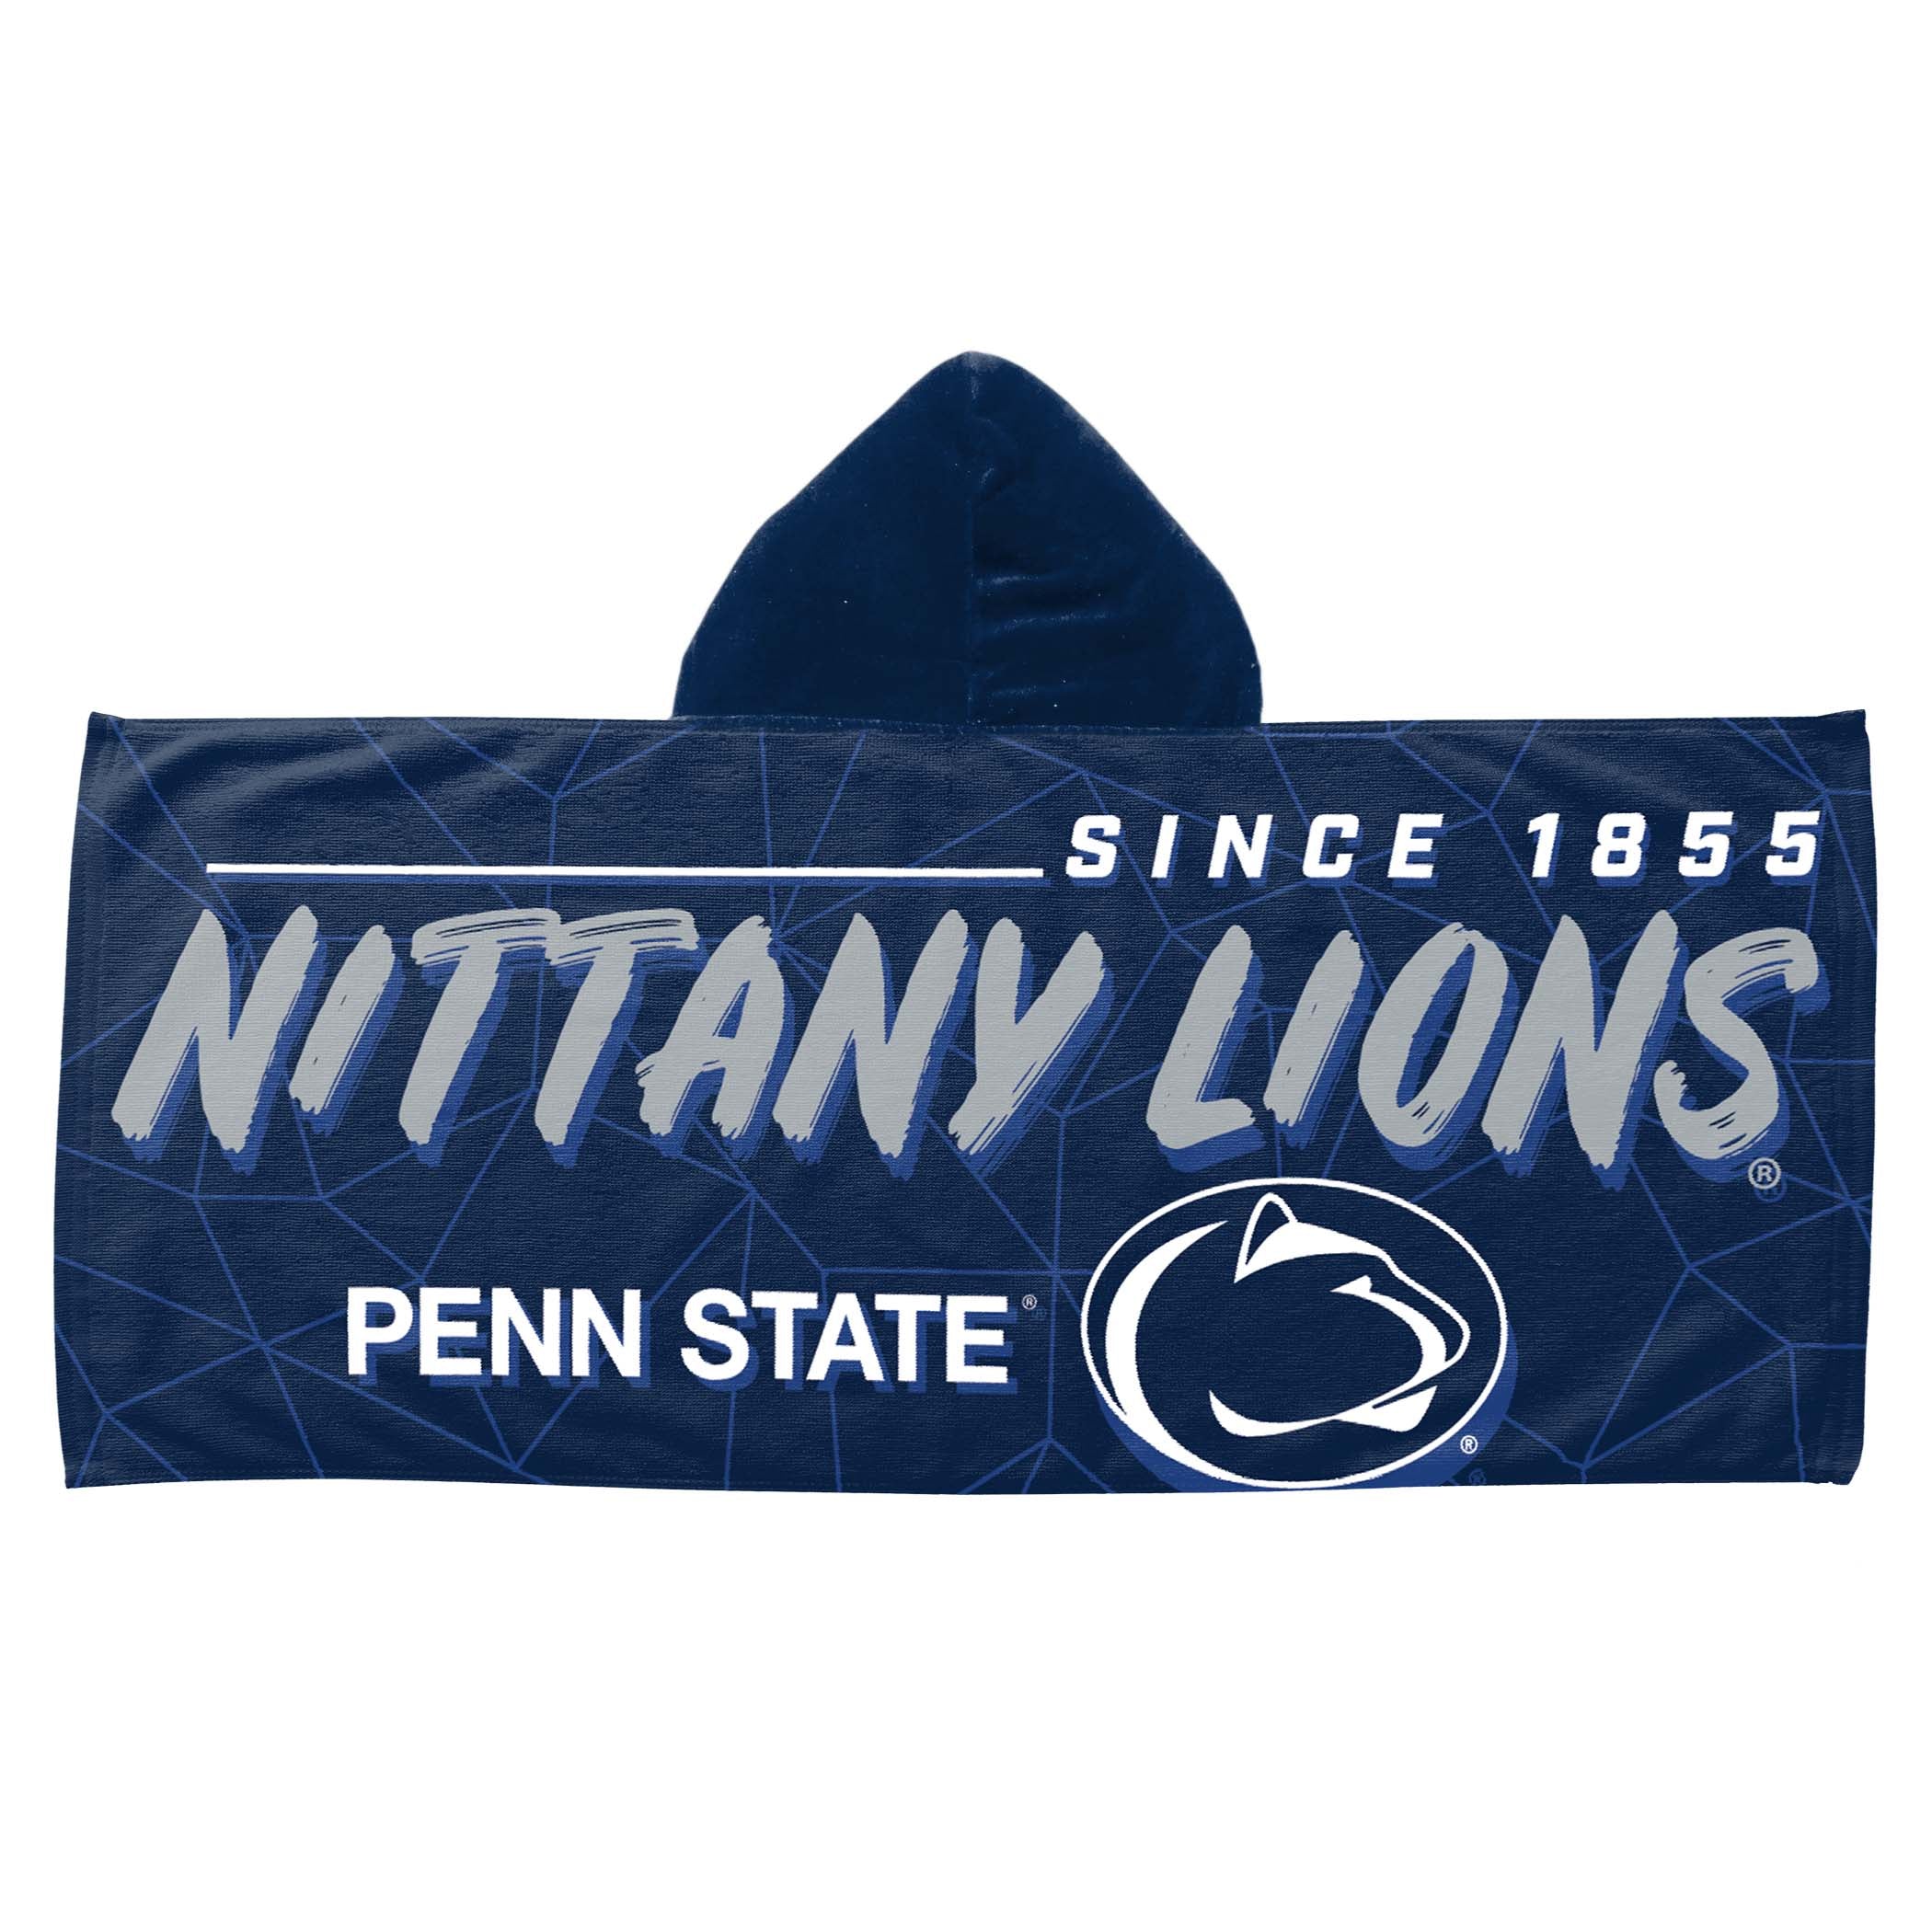 NCAA Penn State Nittany Lions Youth Hooded Beach Towel 21x51 Inches